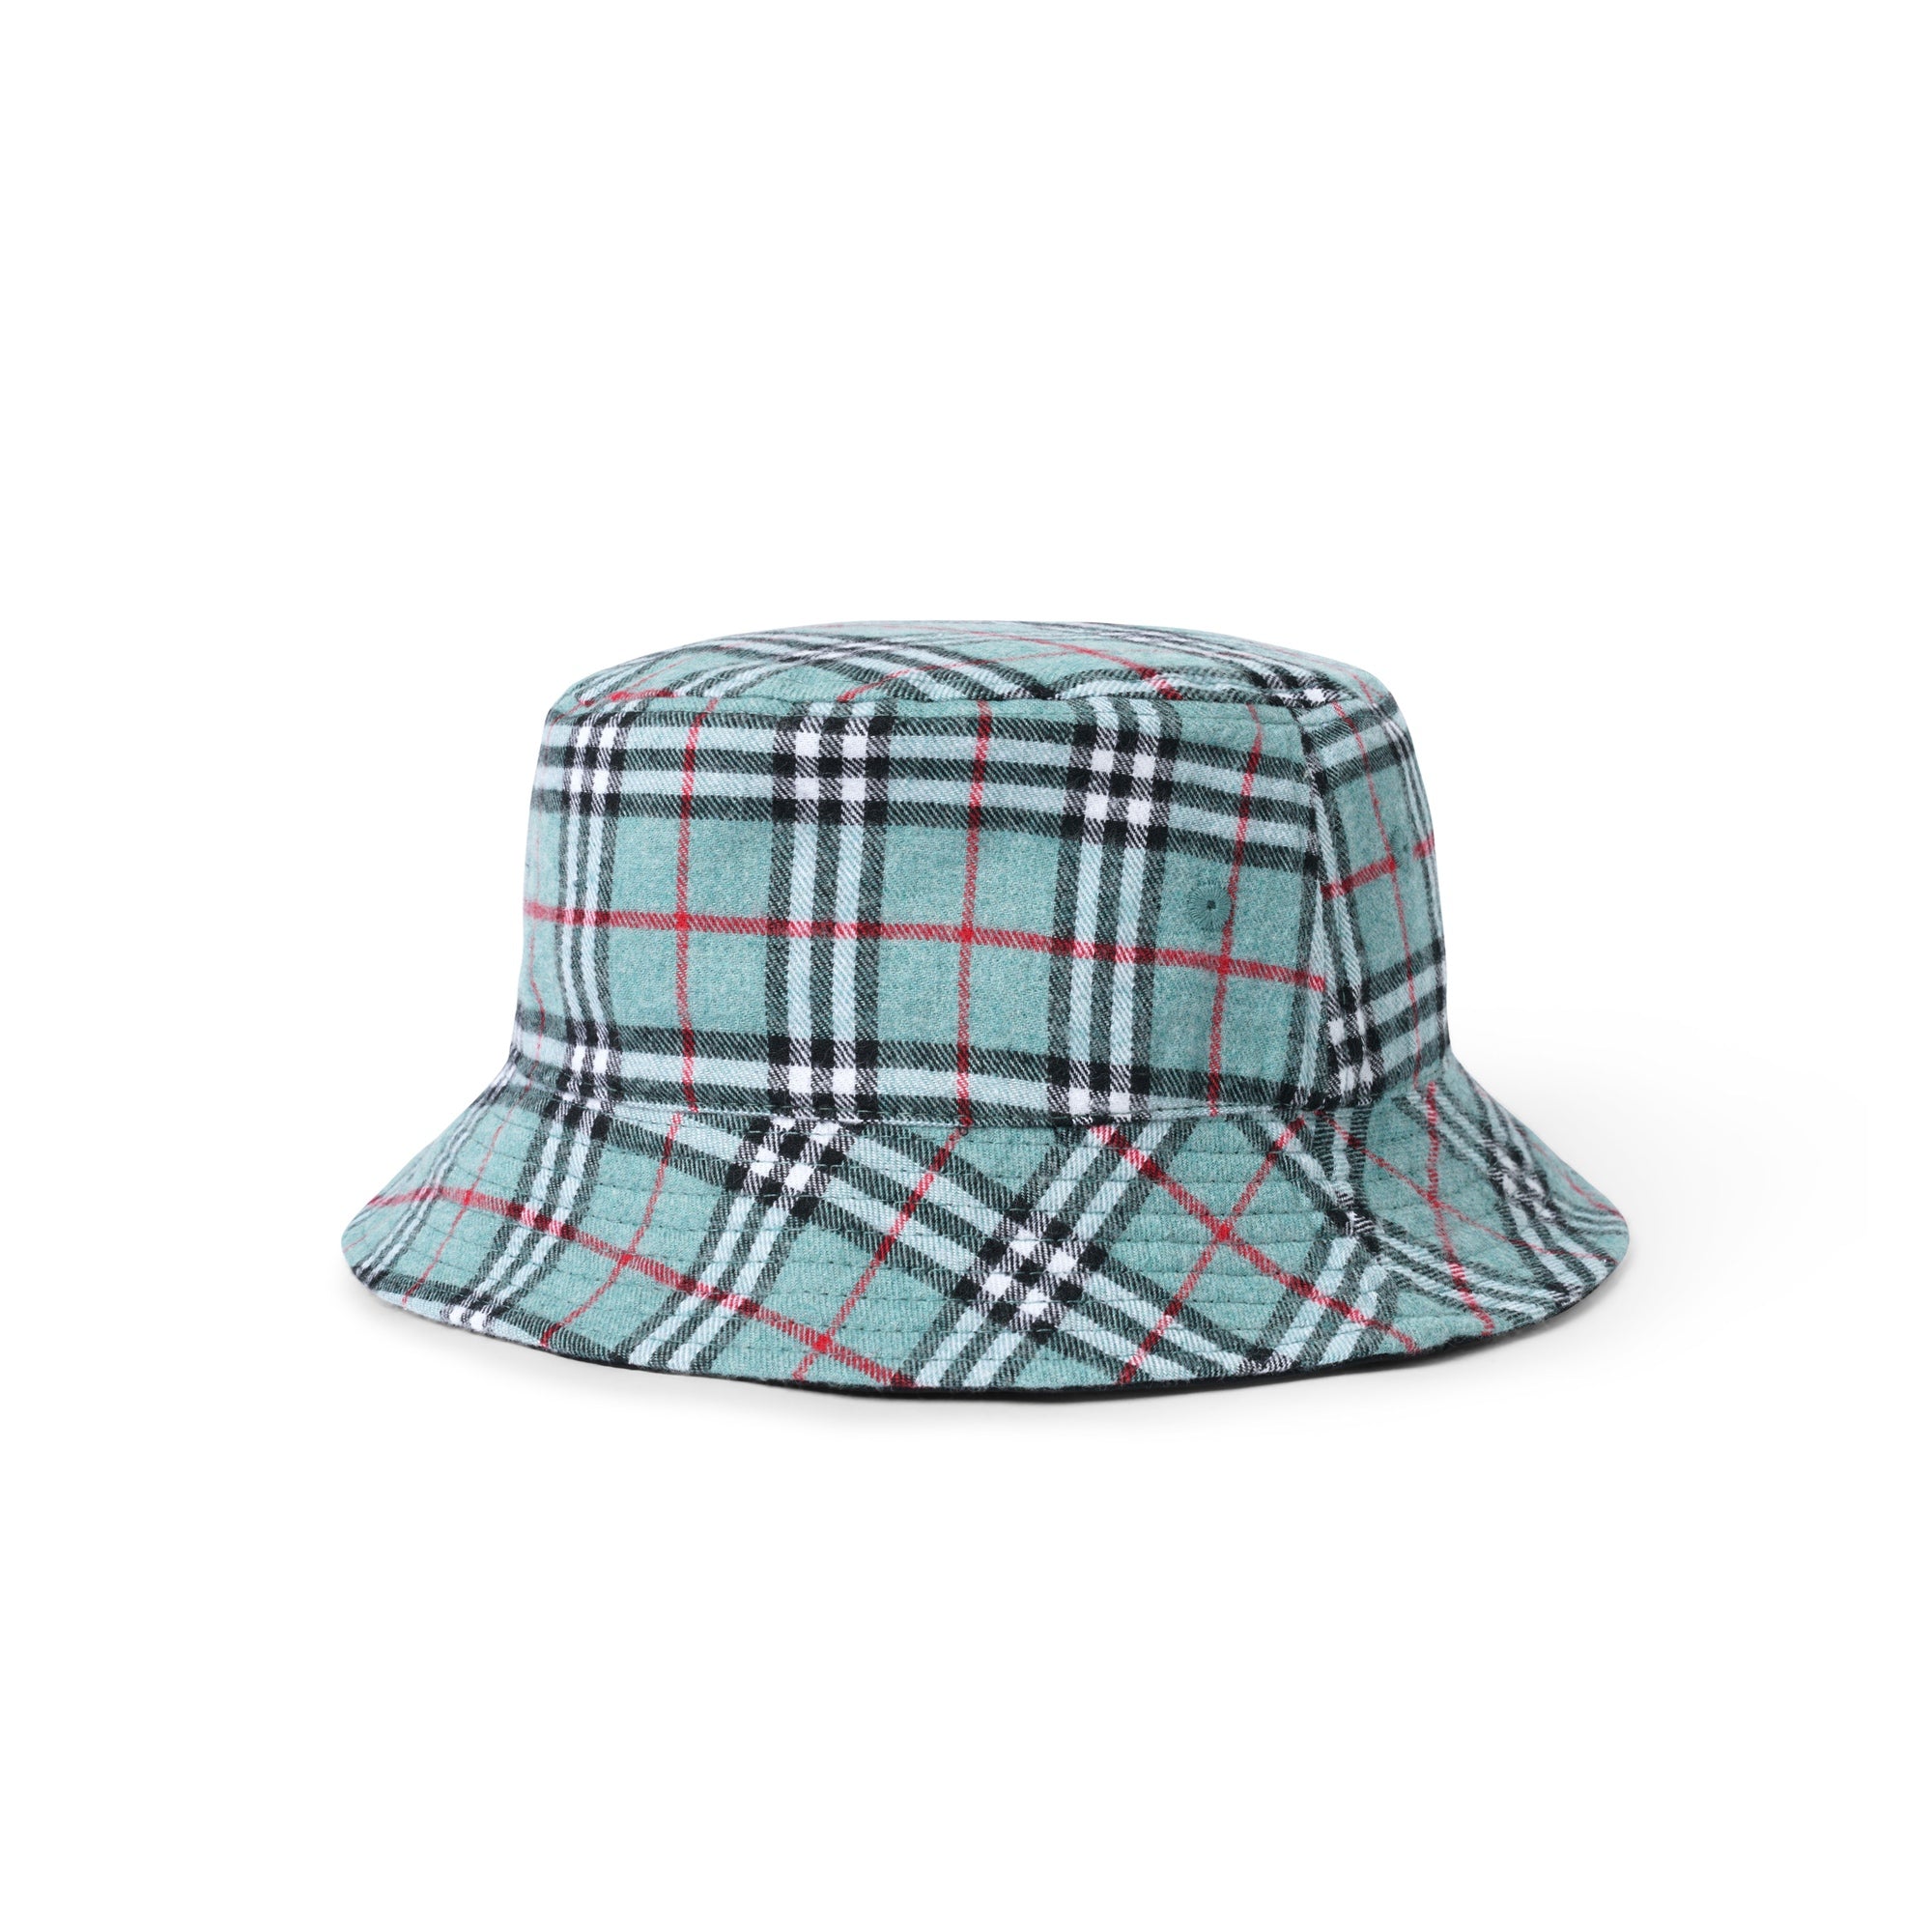 Butter Goods Plaid Reversible Bucket Hat Navy/Forest/White S/M